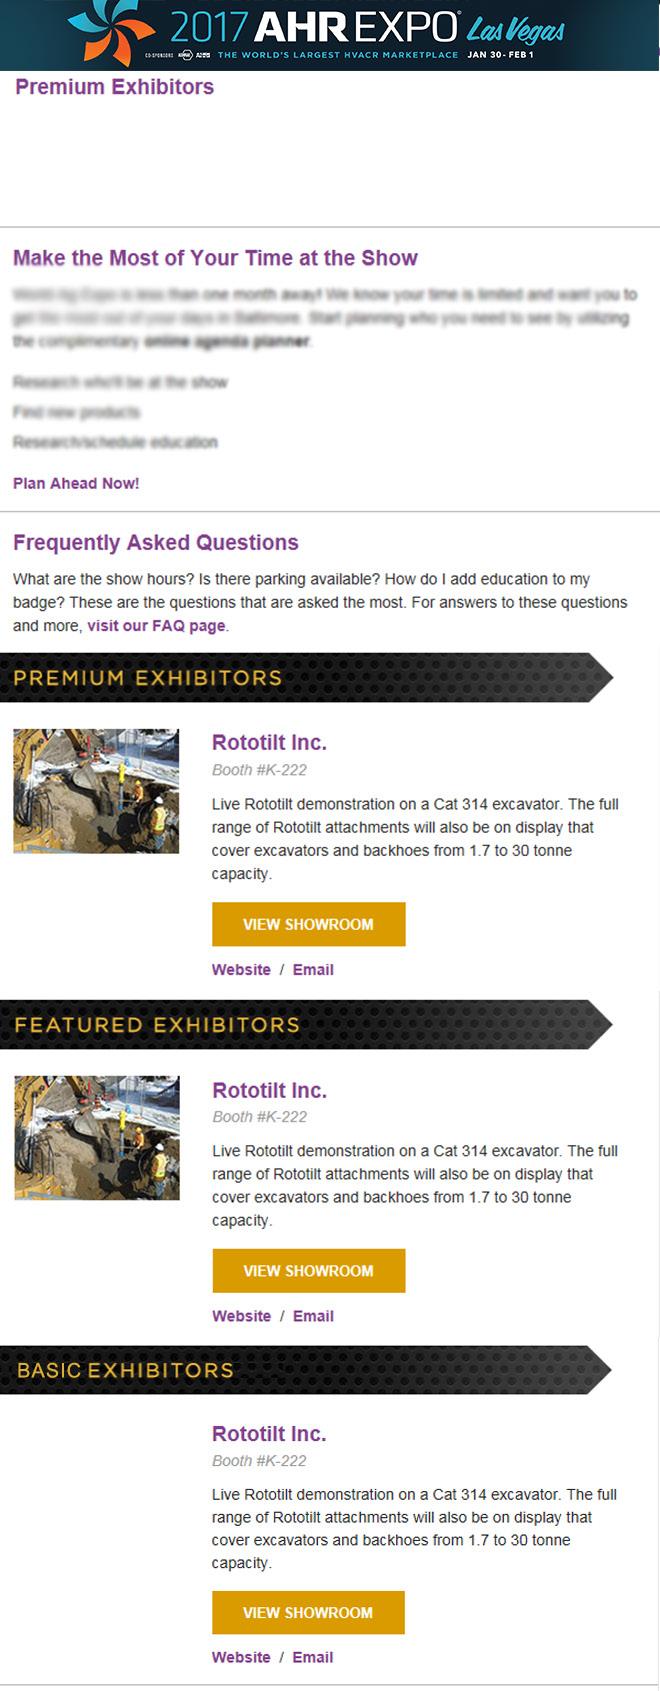 enewsletter Don t miss this limited opportunity to educate attendees about your featured products and services in this must-read enewsletter from AHR Expo!